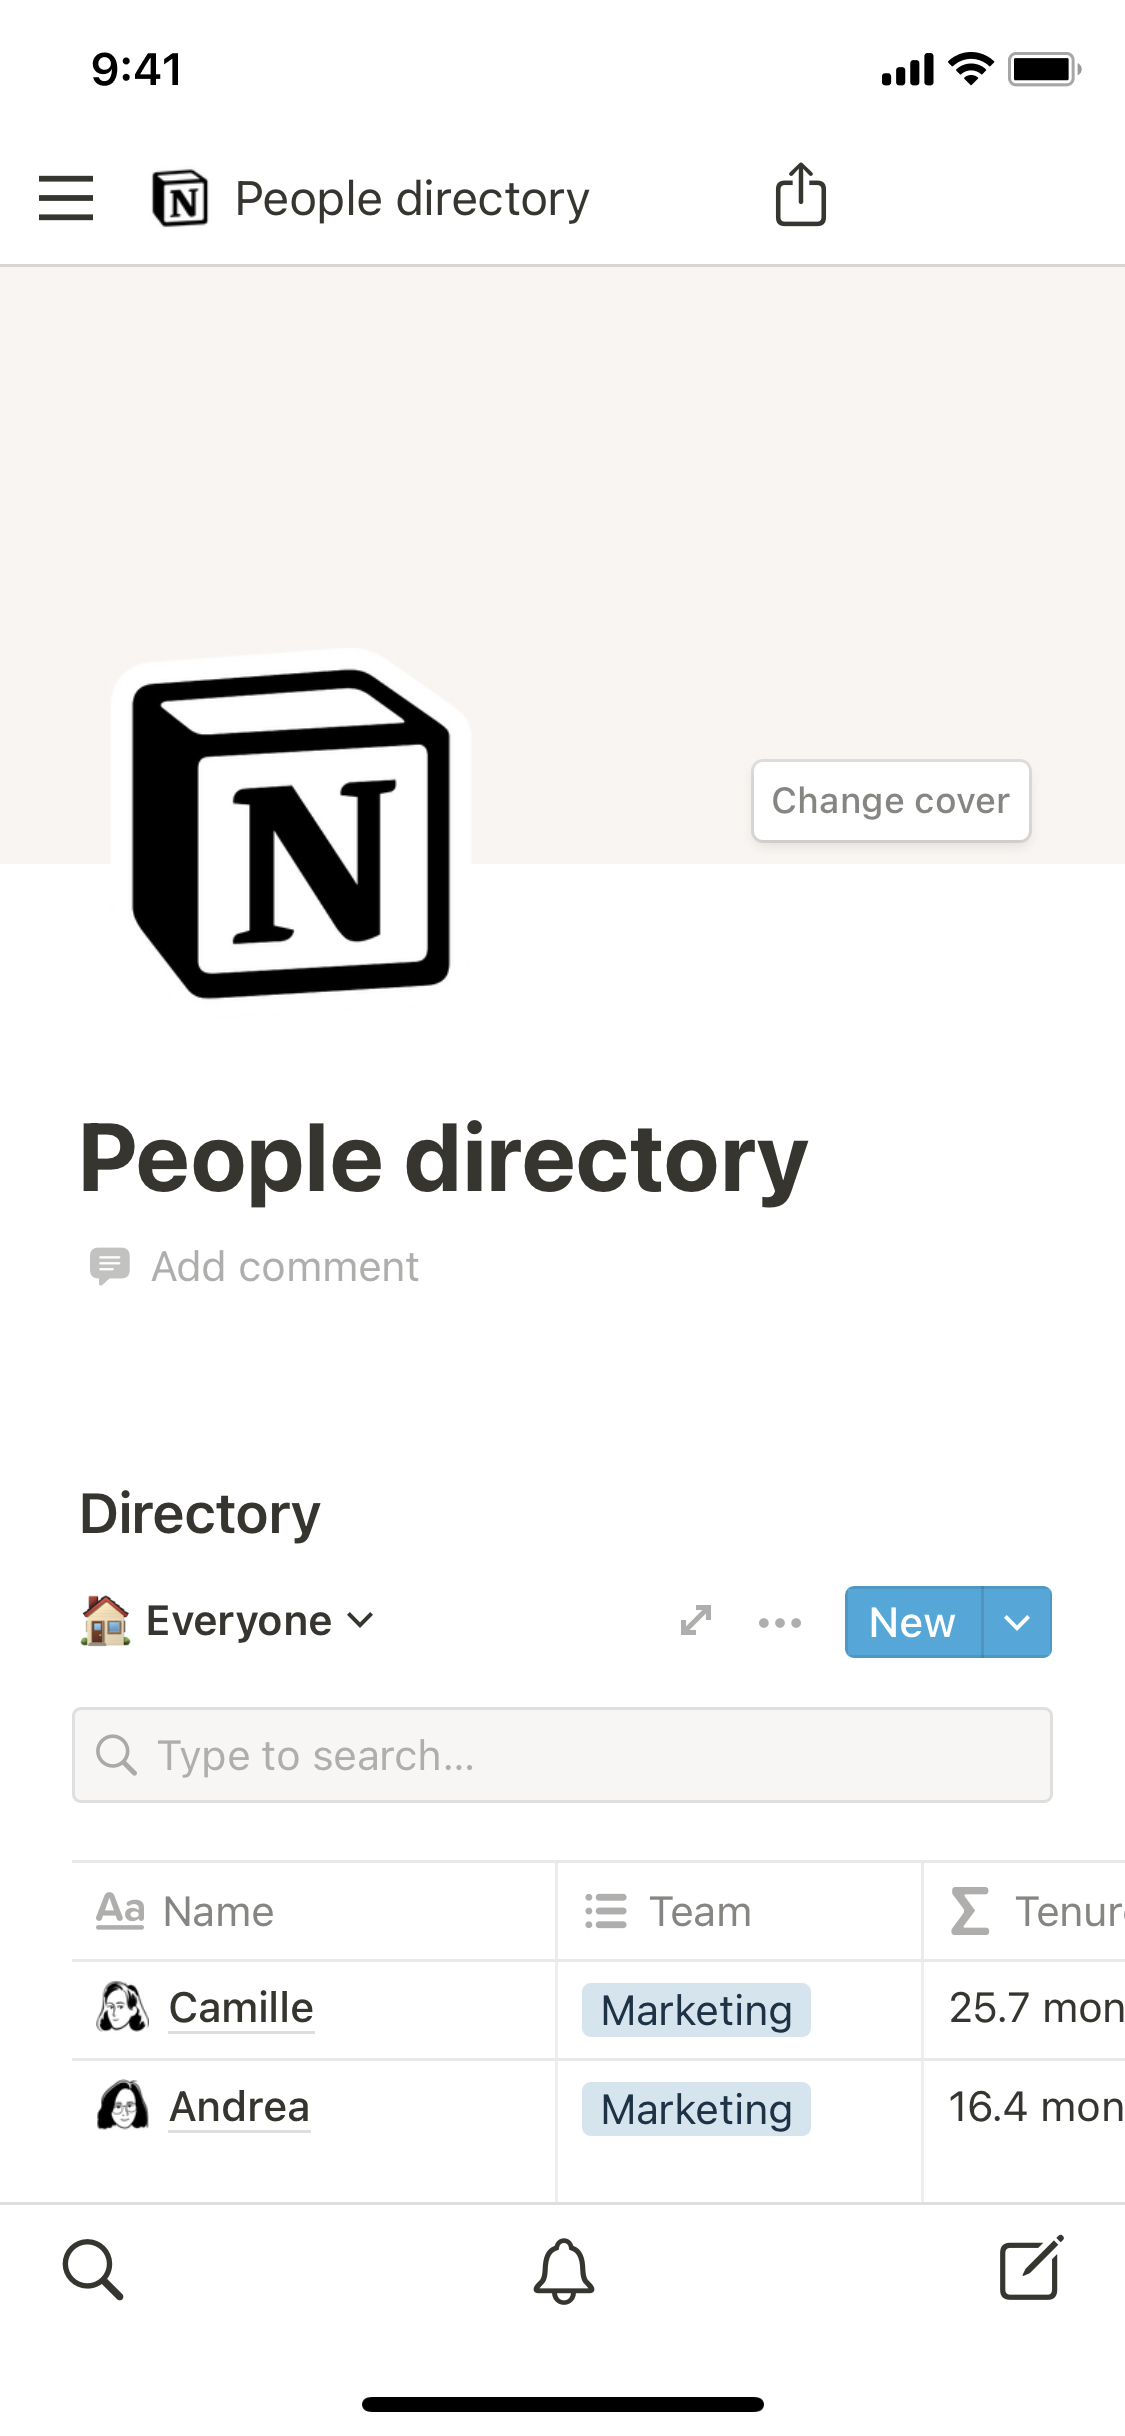 The mobile image for the Notion's people directory template